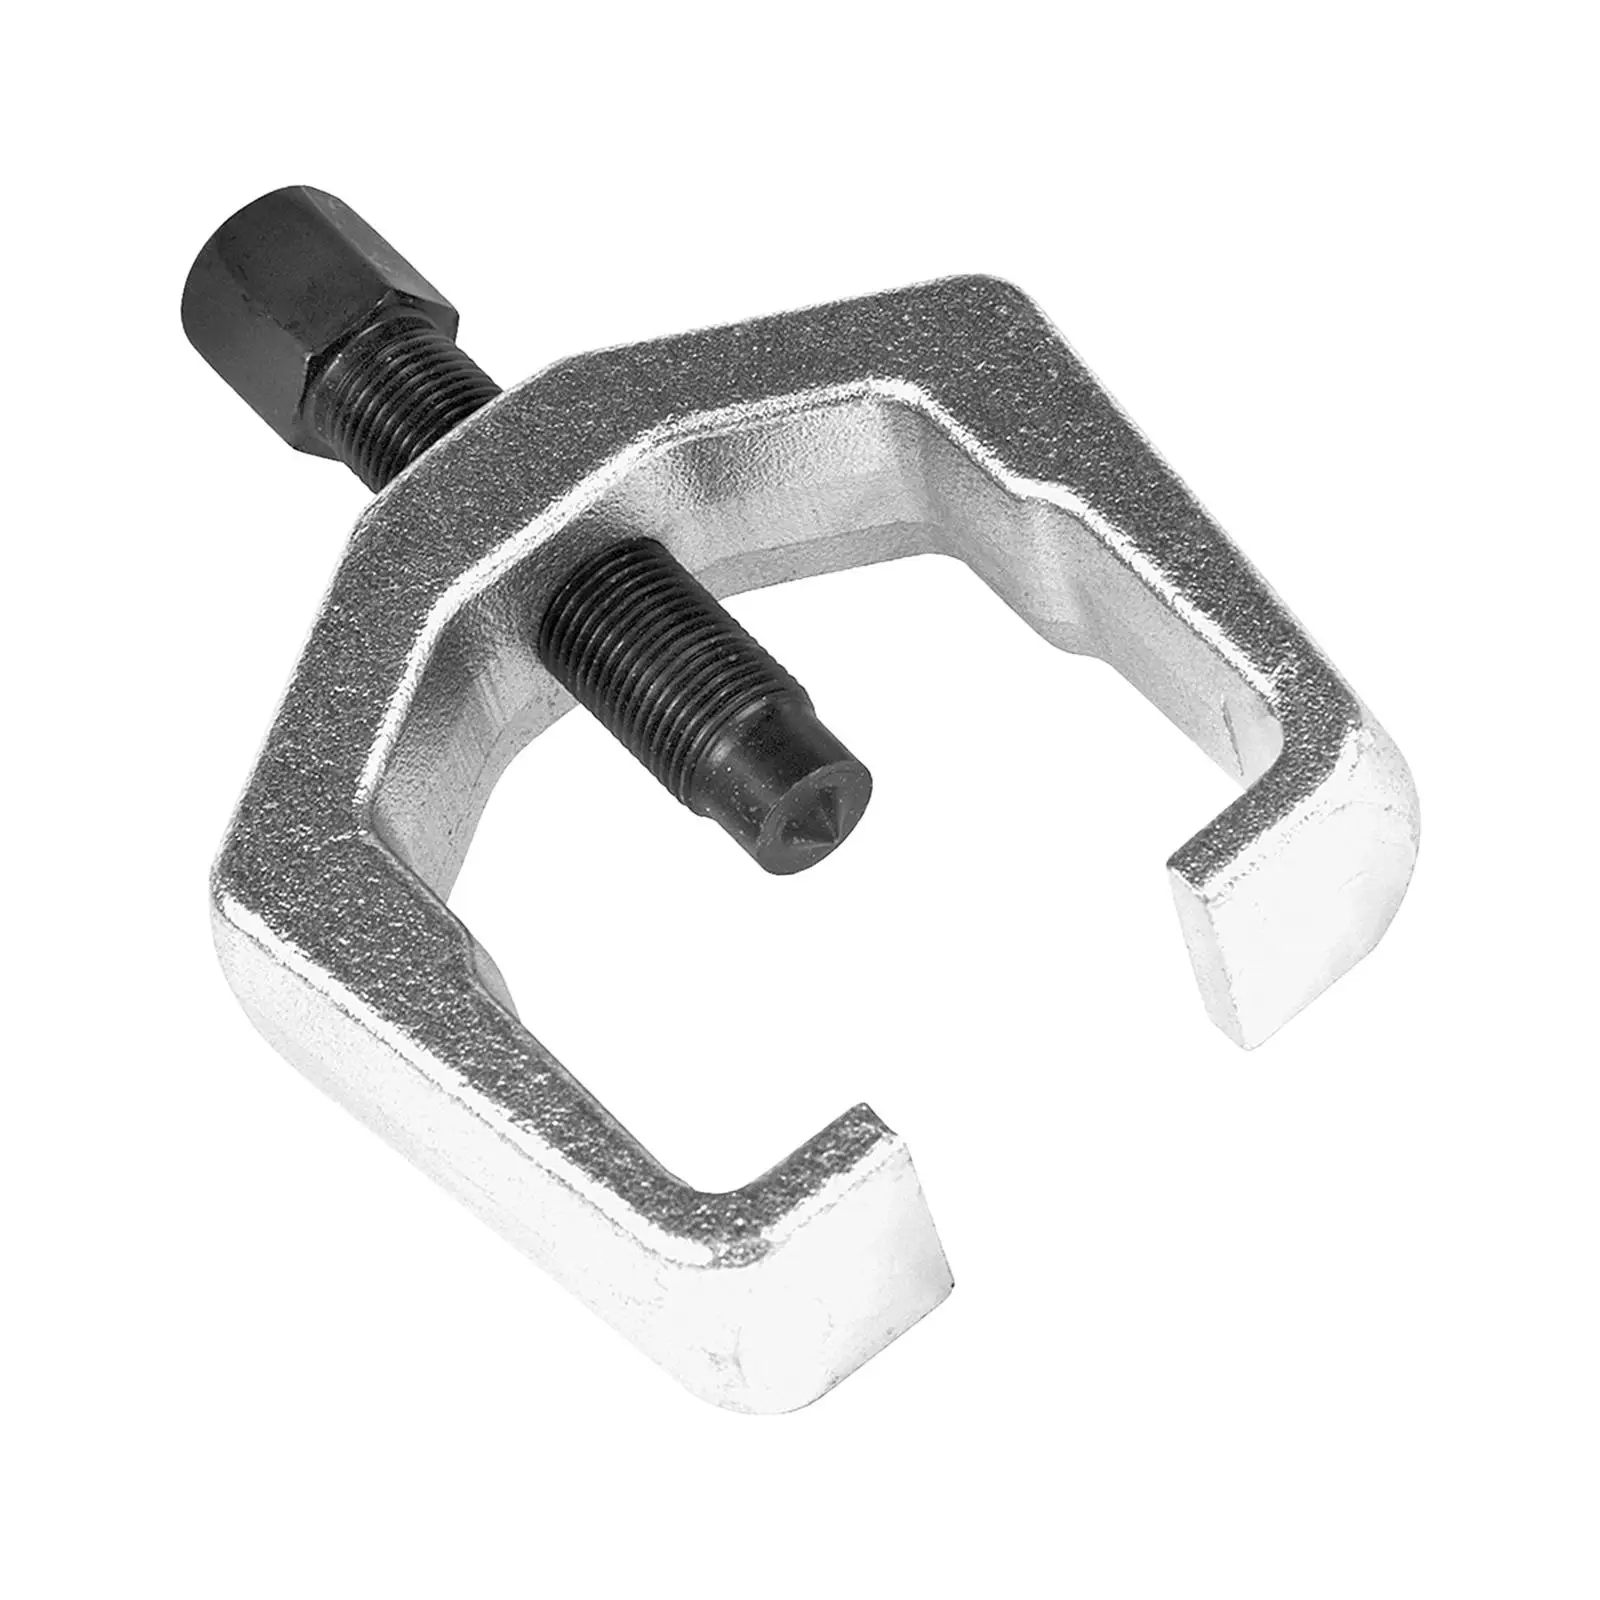 Slack Adjuster Puller Easy to Operate Durable Heavy Duty Pulley Puller Tool